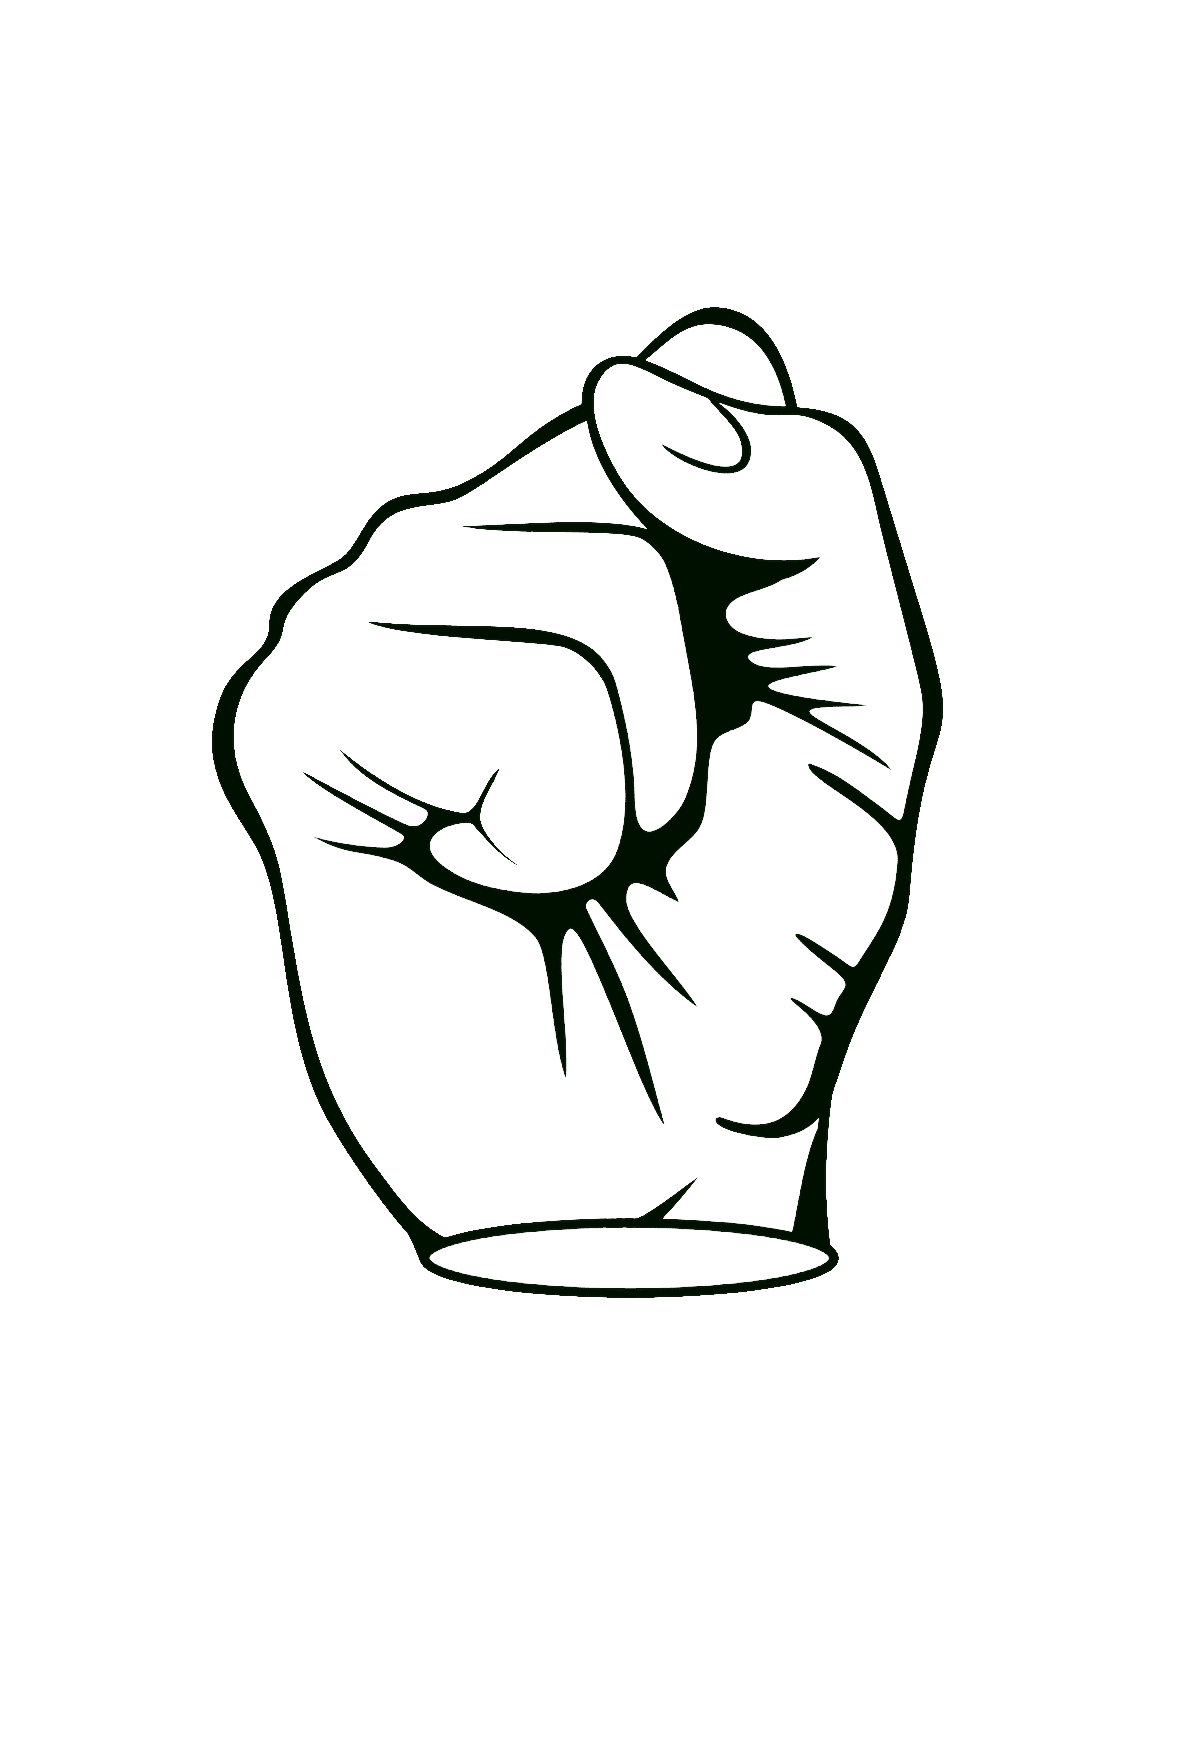 Hand Clenching Fist Clipart